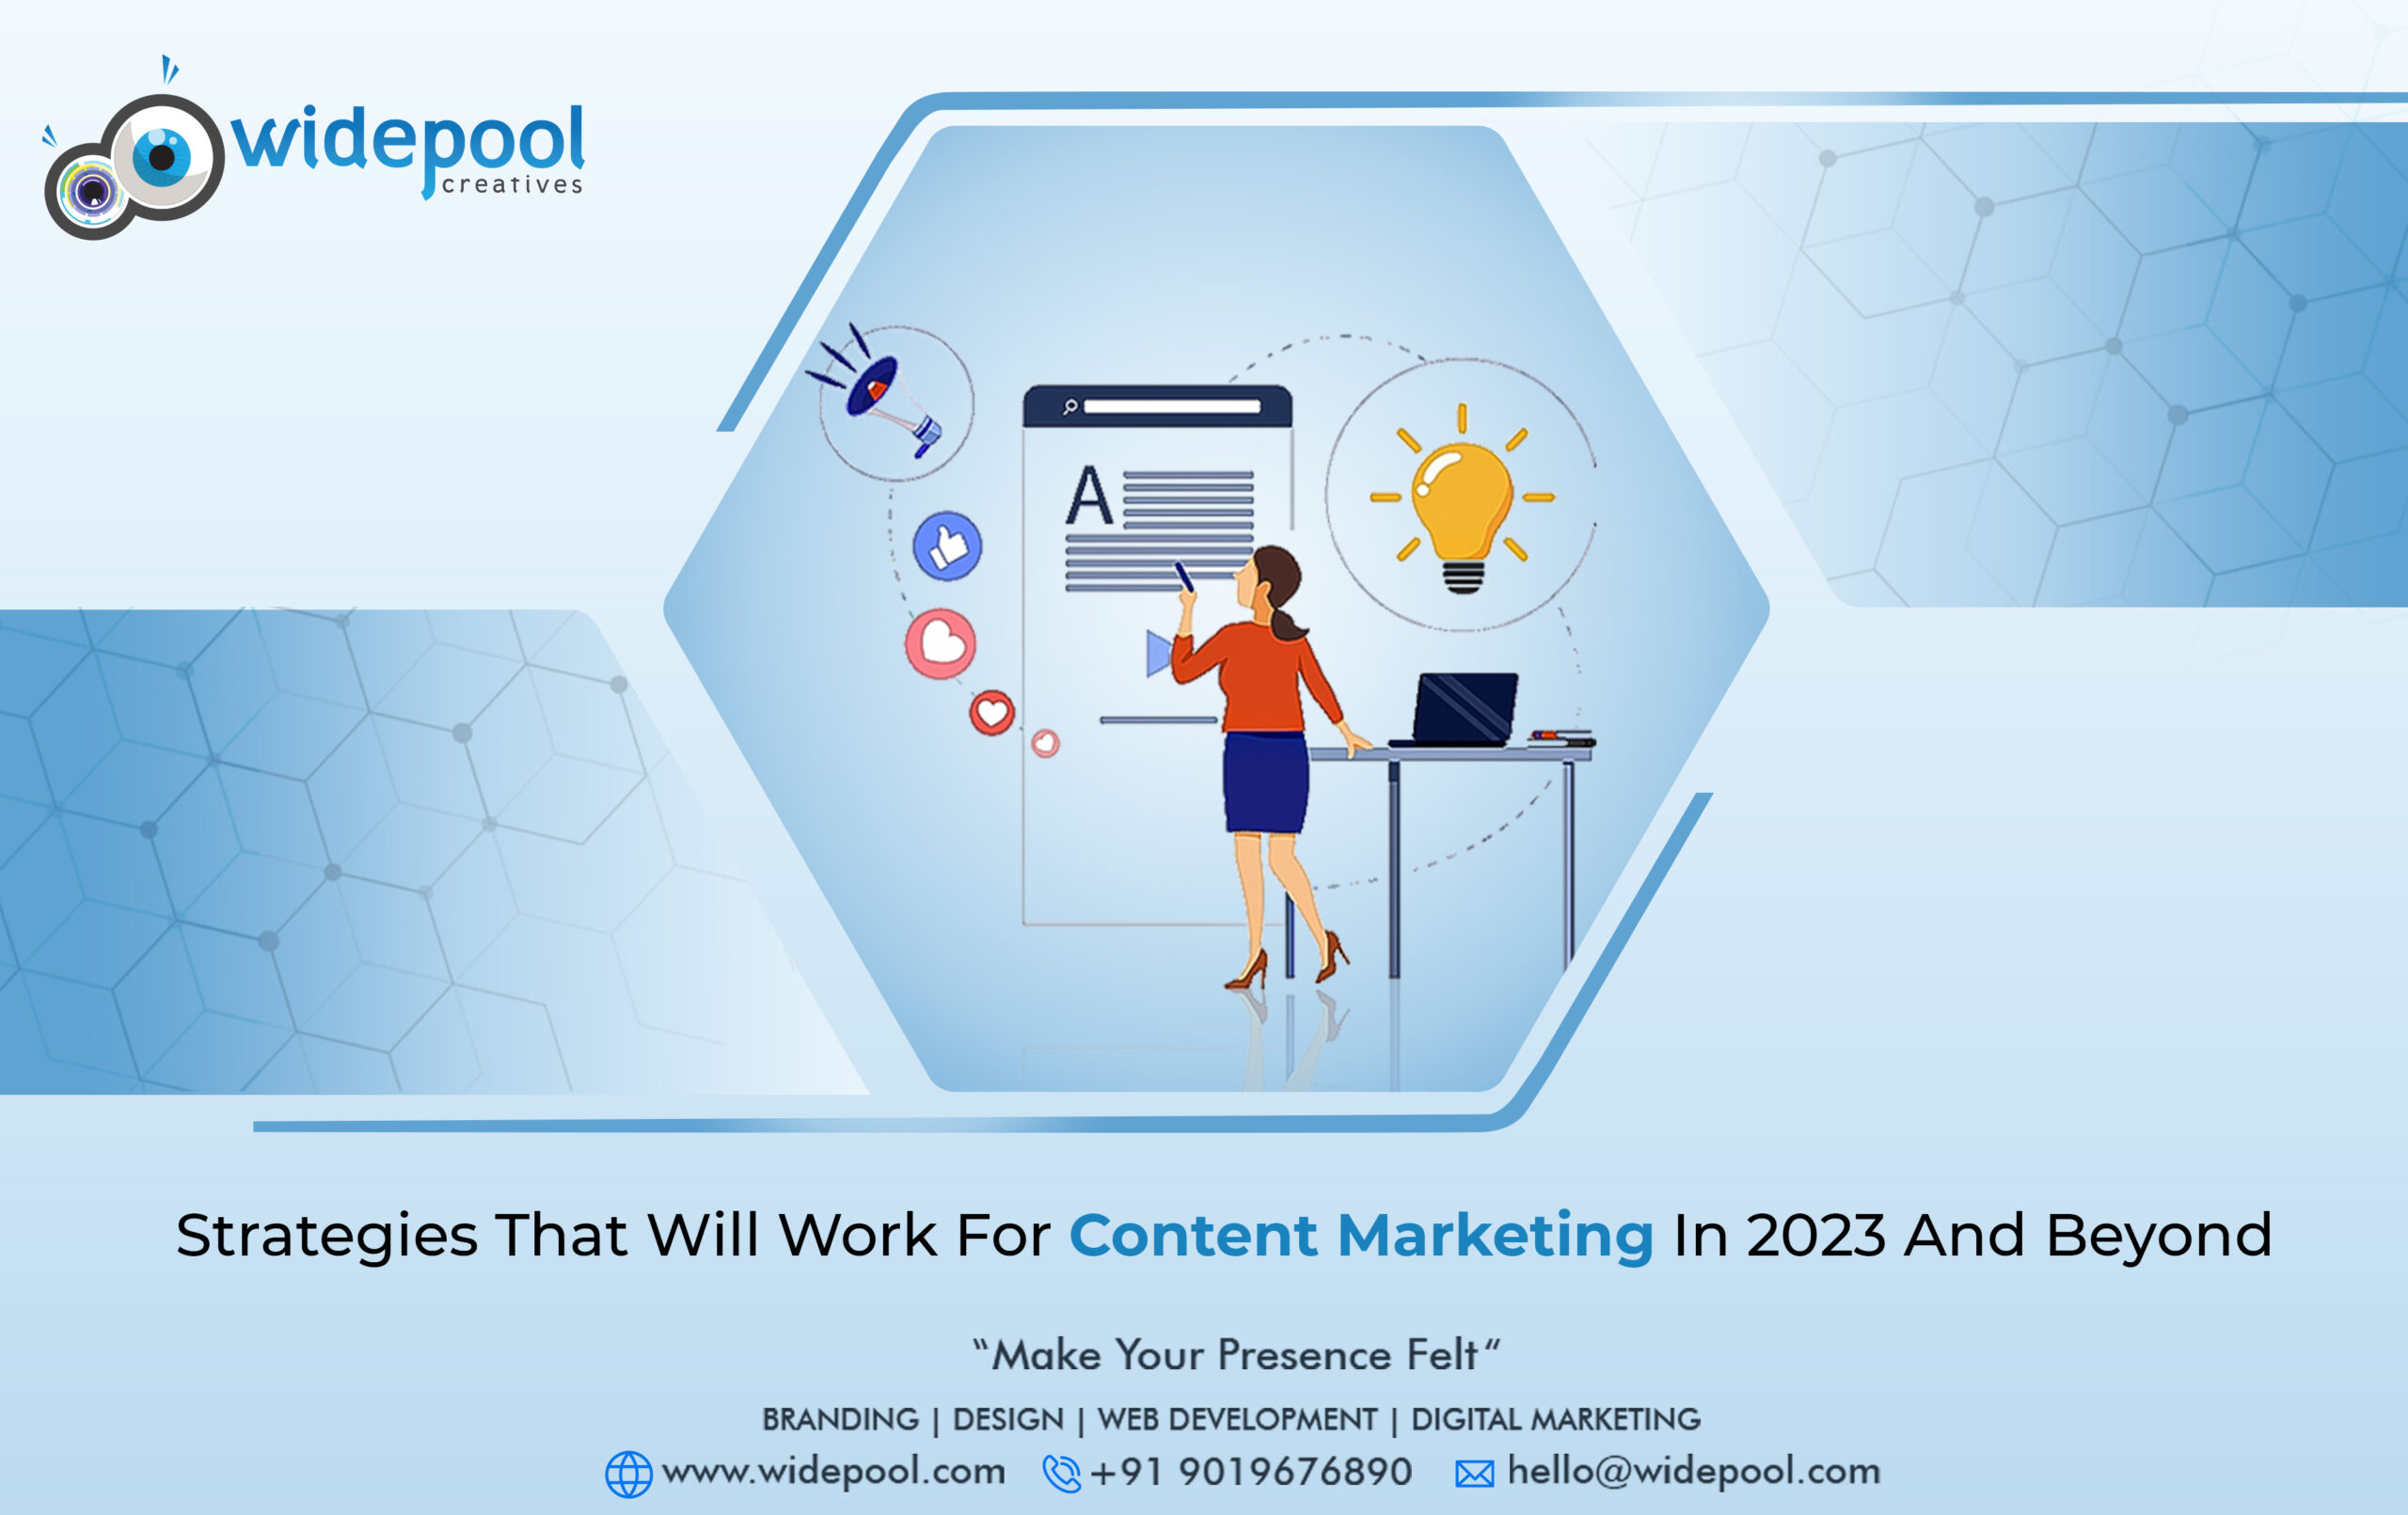 Strategies That Will Work for Content Marketing in 2023 and Beyond